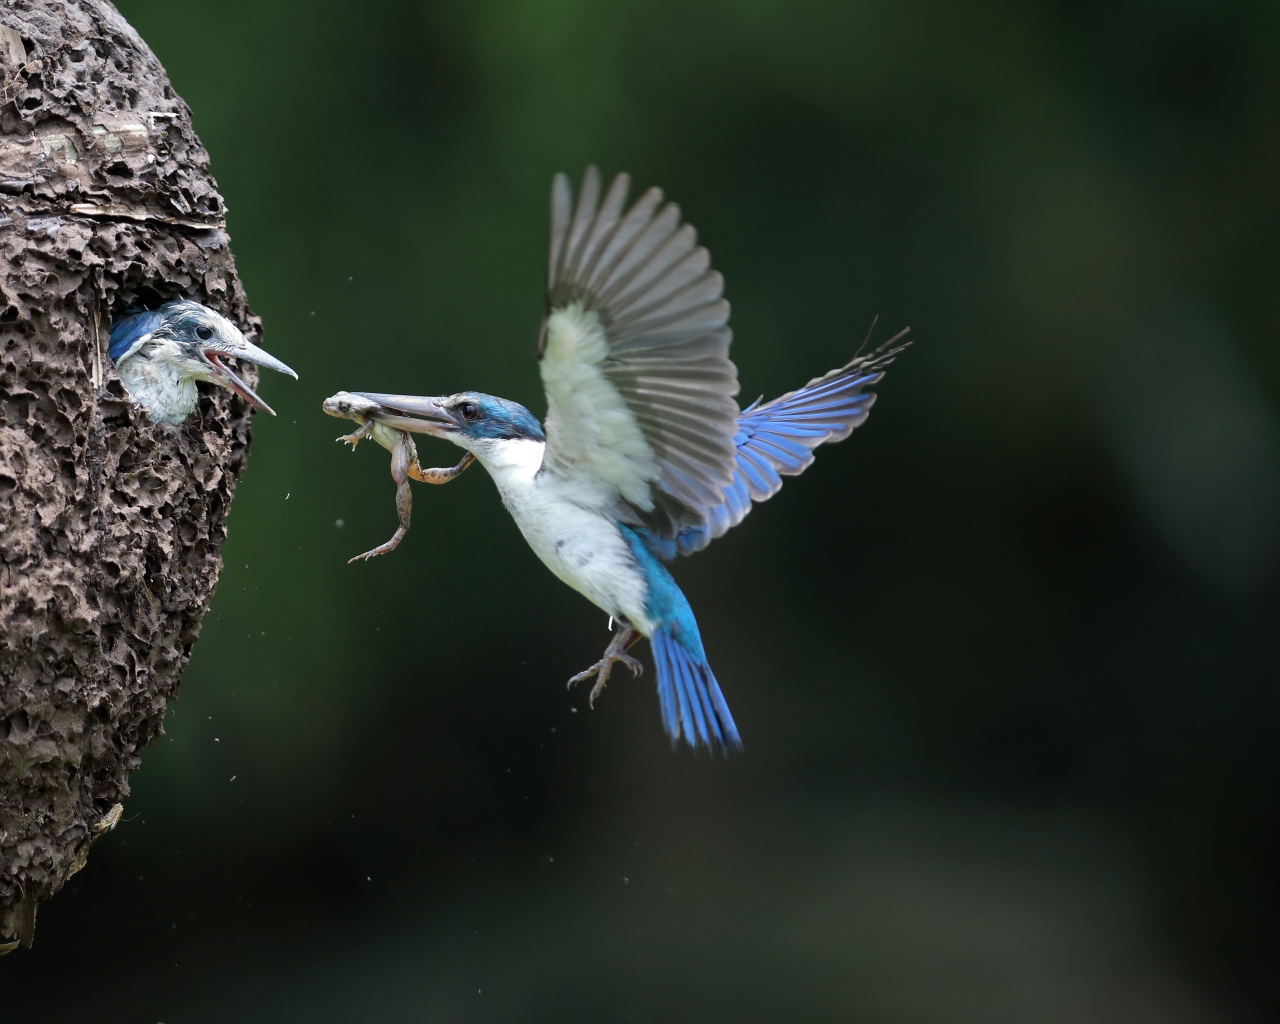 Kingfisher bird feeds the chicks in the nest